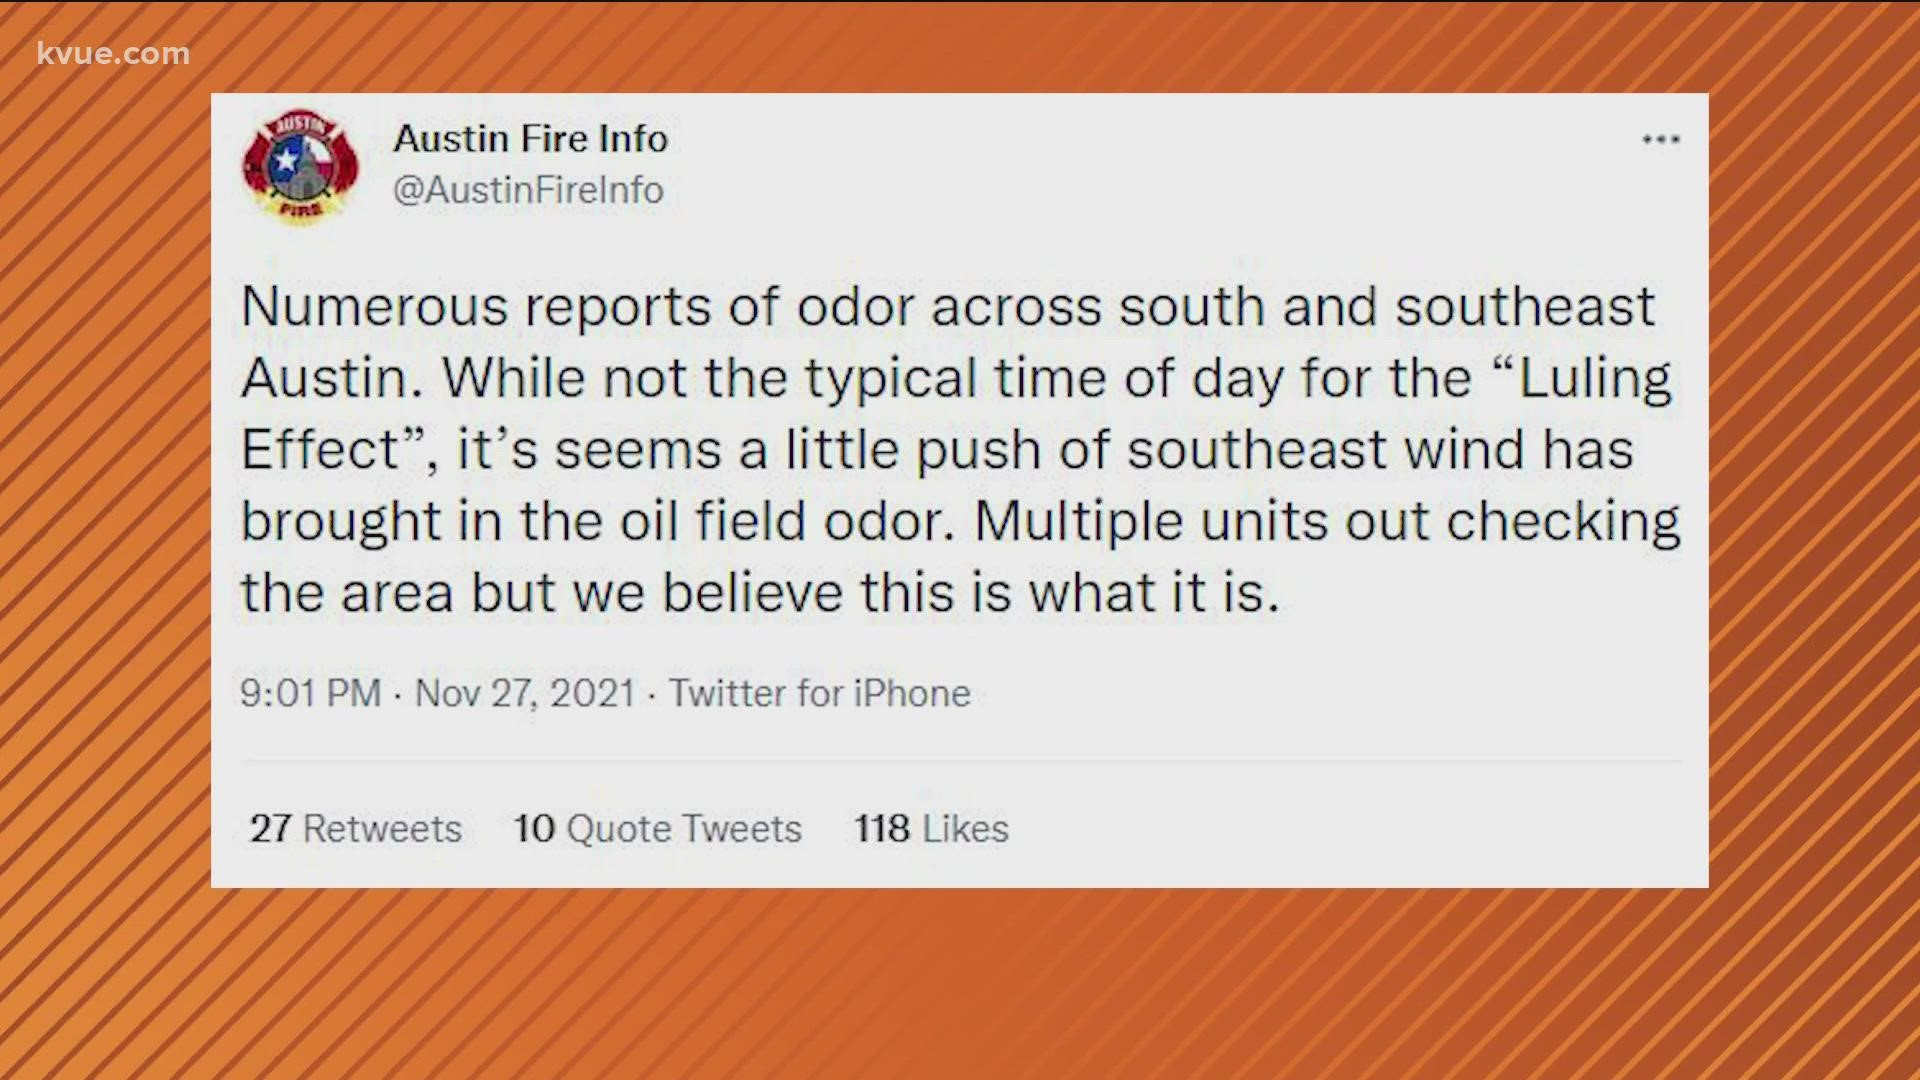 The odor is likely from nearby oil fields.